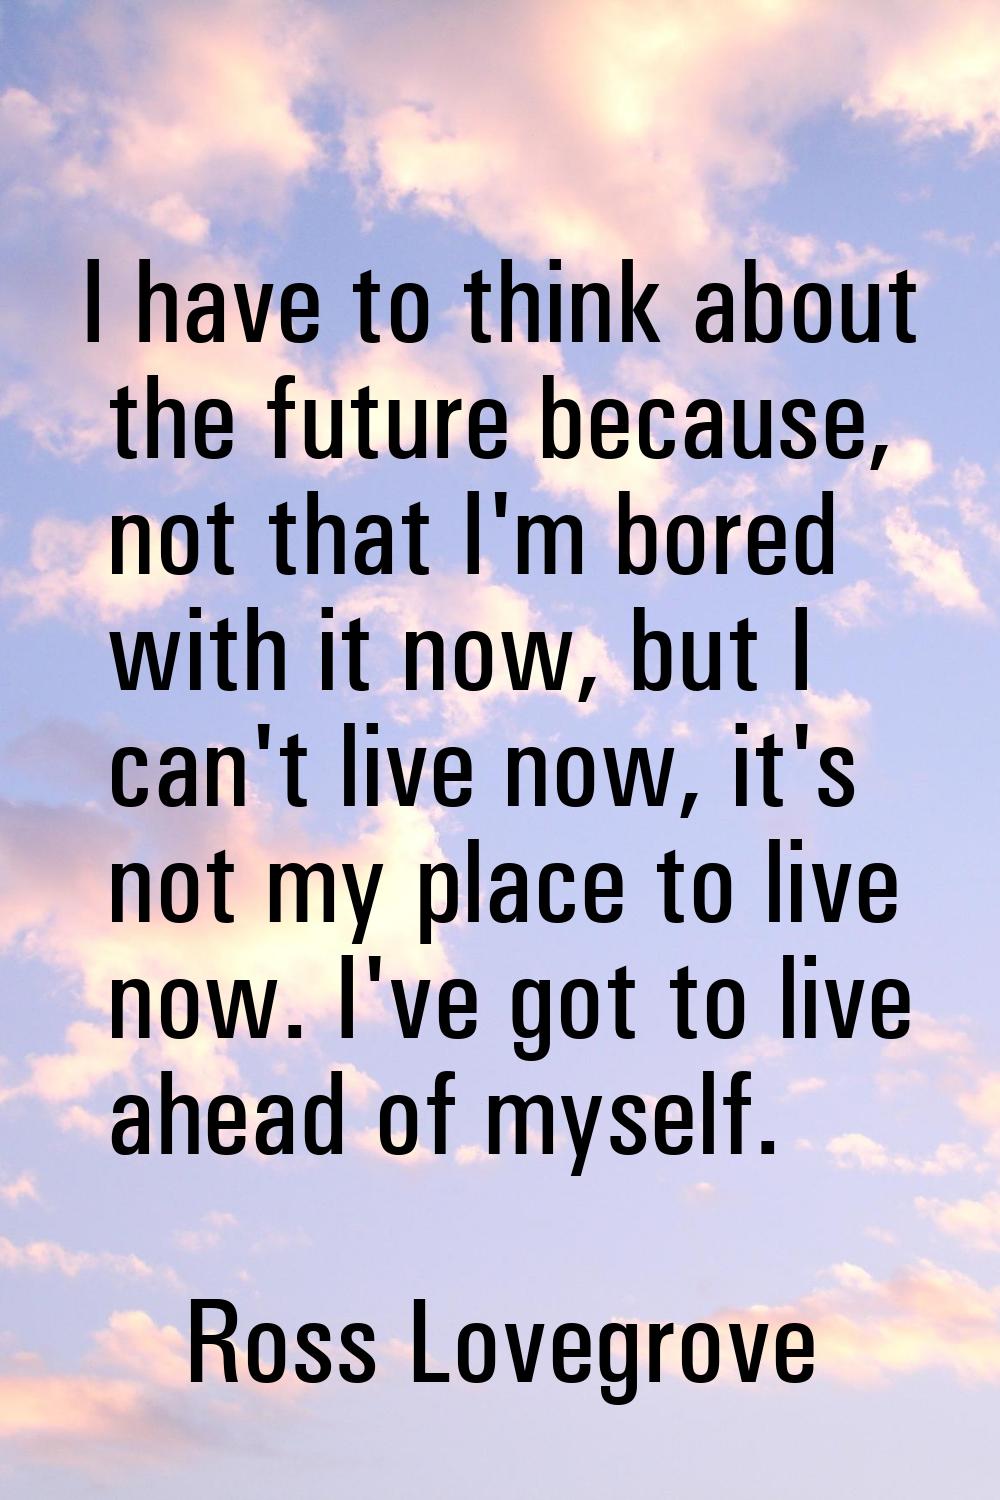 I have to think about the future because, not that I'm bored with it now, but I can't live now, it'